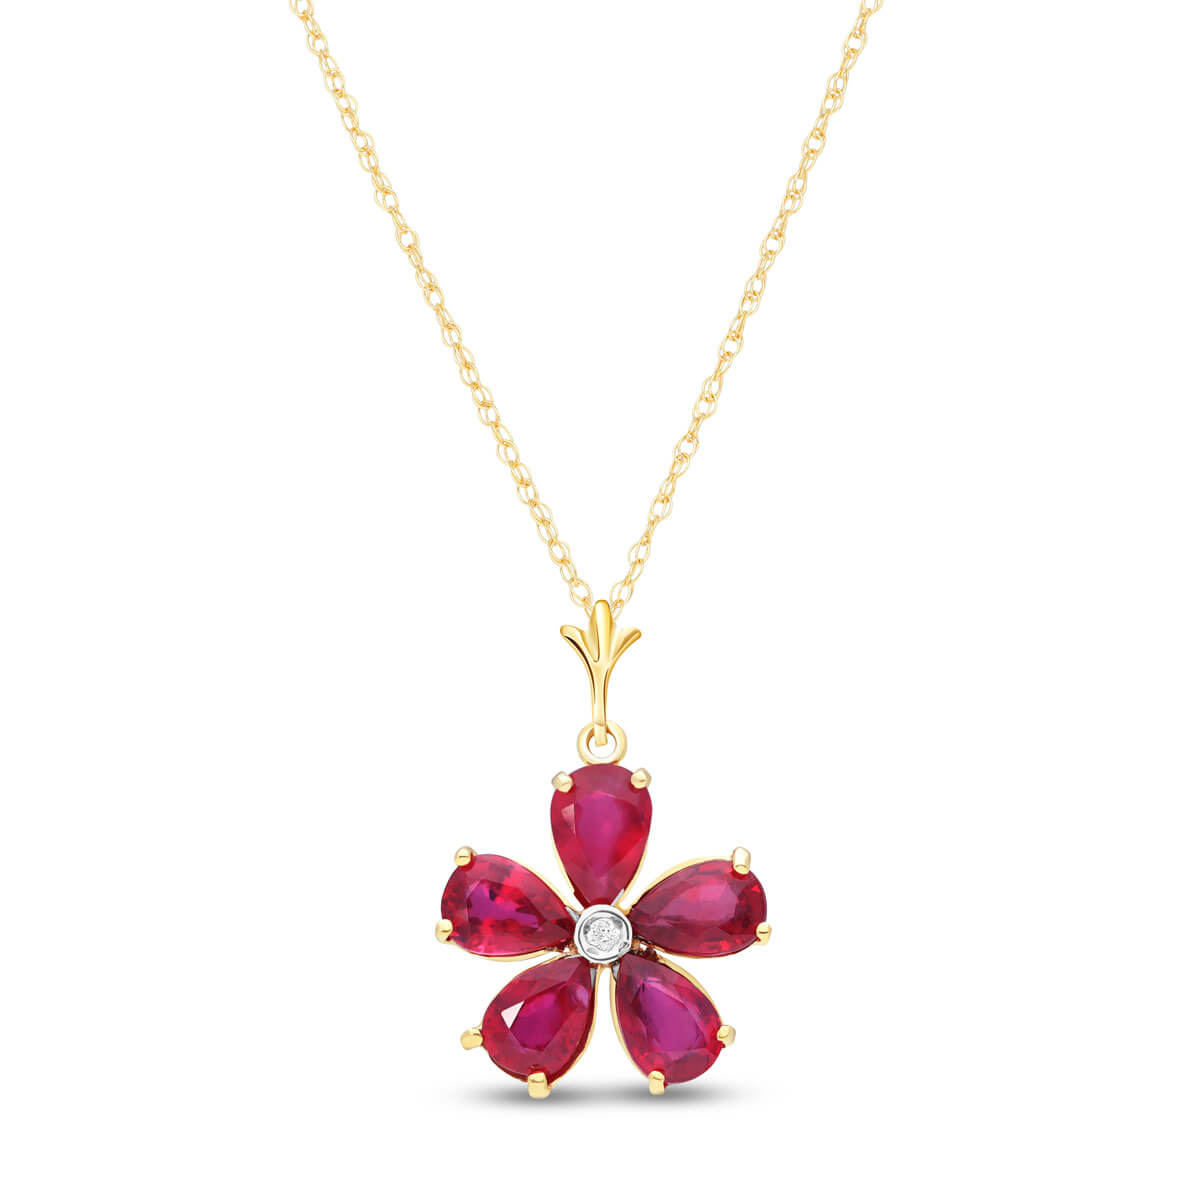 Ruby & Diamond Flower Petal Pendant Necklace in 9ct Gold